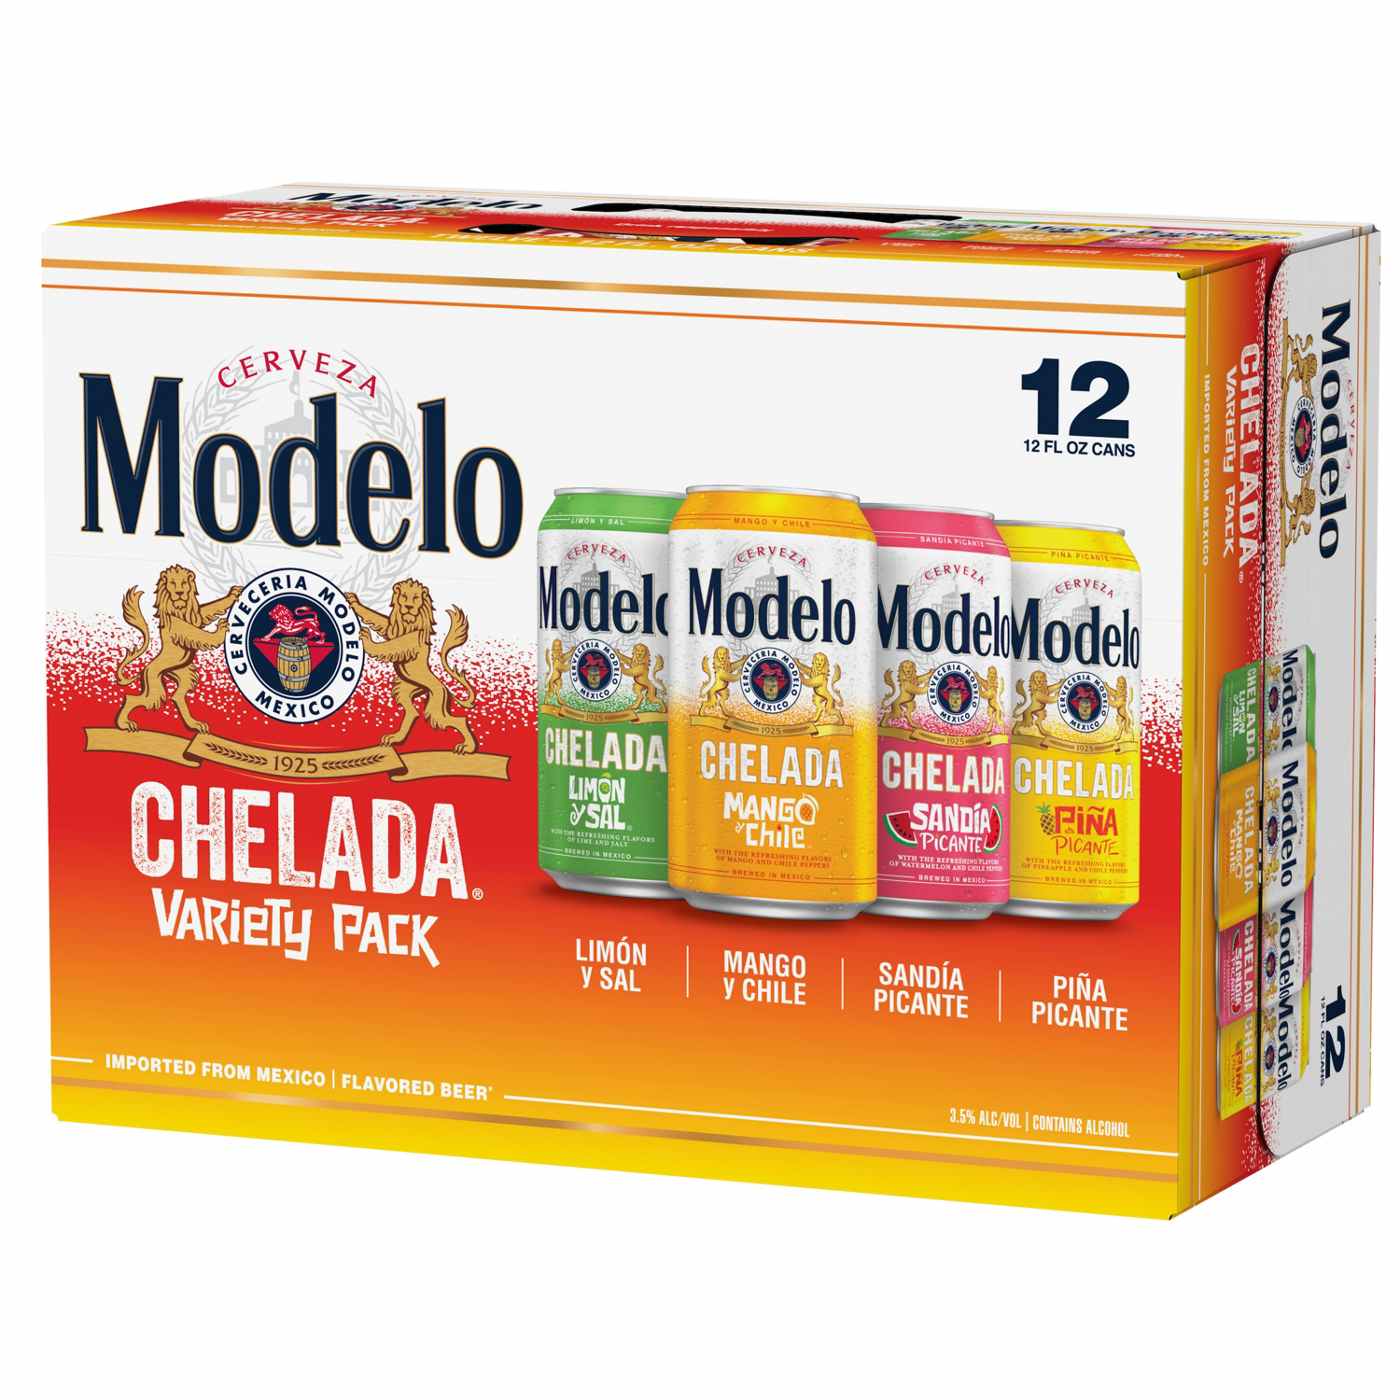 Modelo Chelada Variety Pack Mexican Import Flavored Beer 12 oz Cans, 12 pk; image 4 of 11